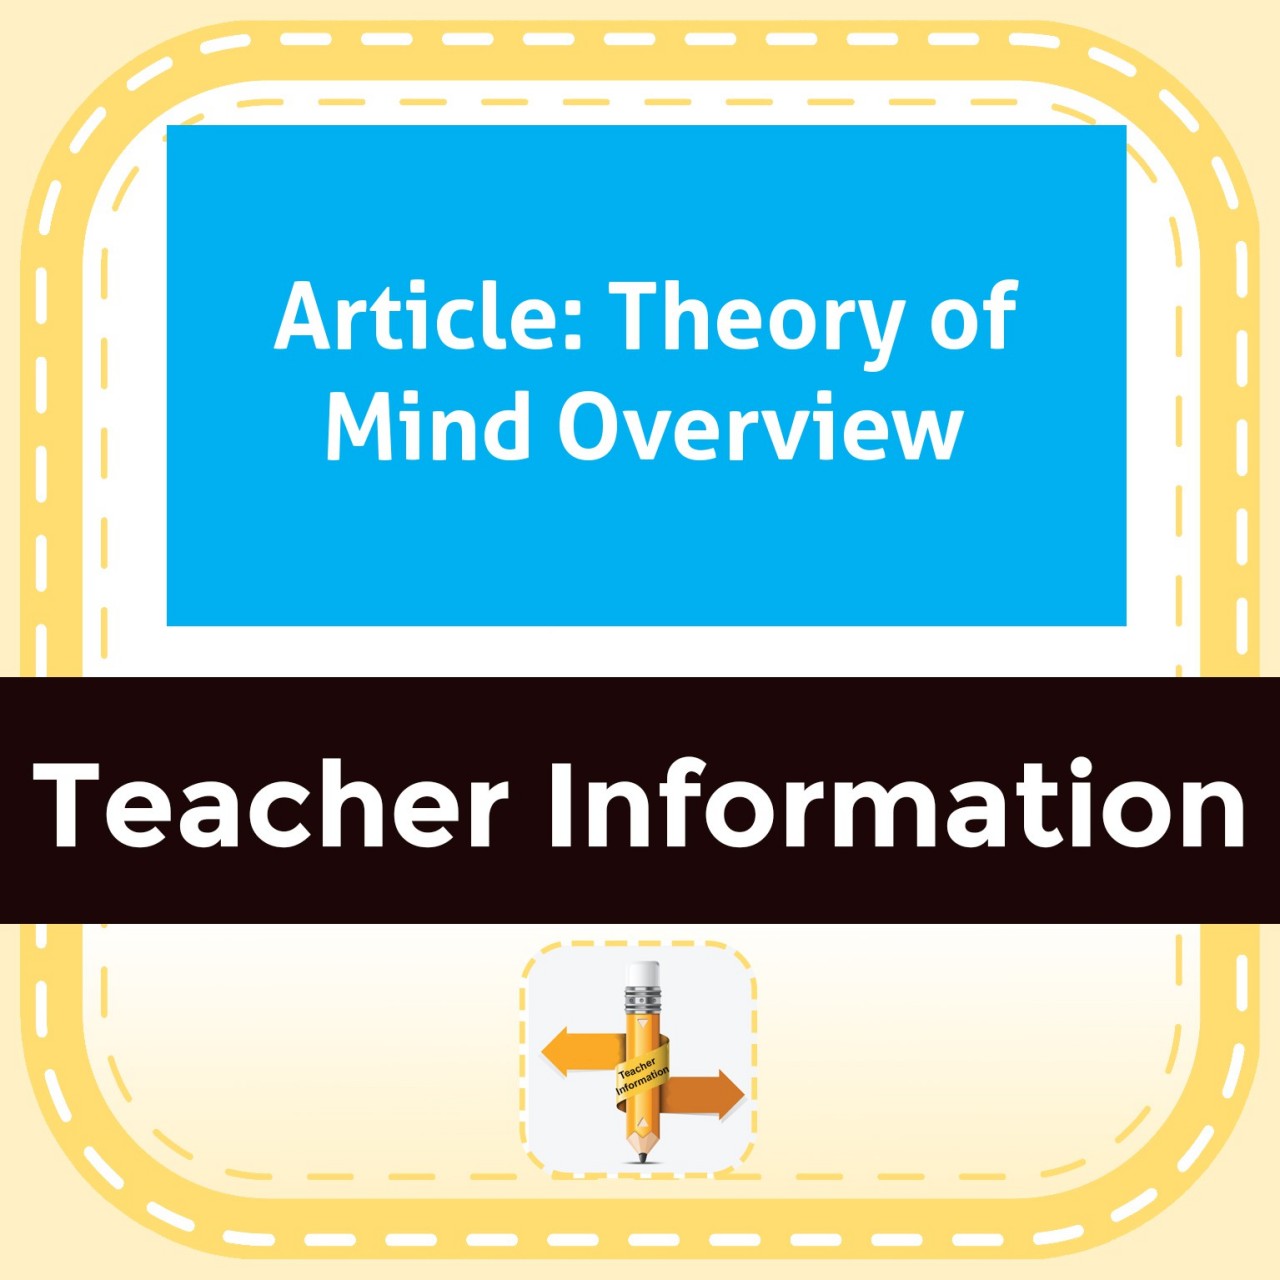 Article: Theory of Mind Overview